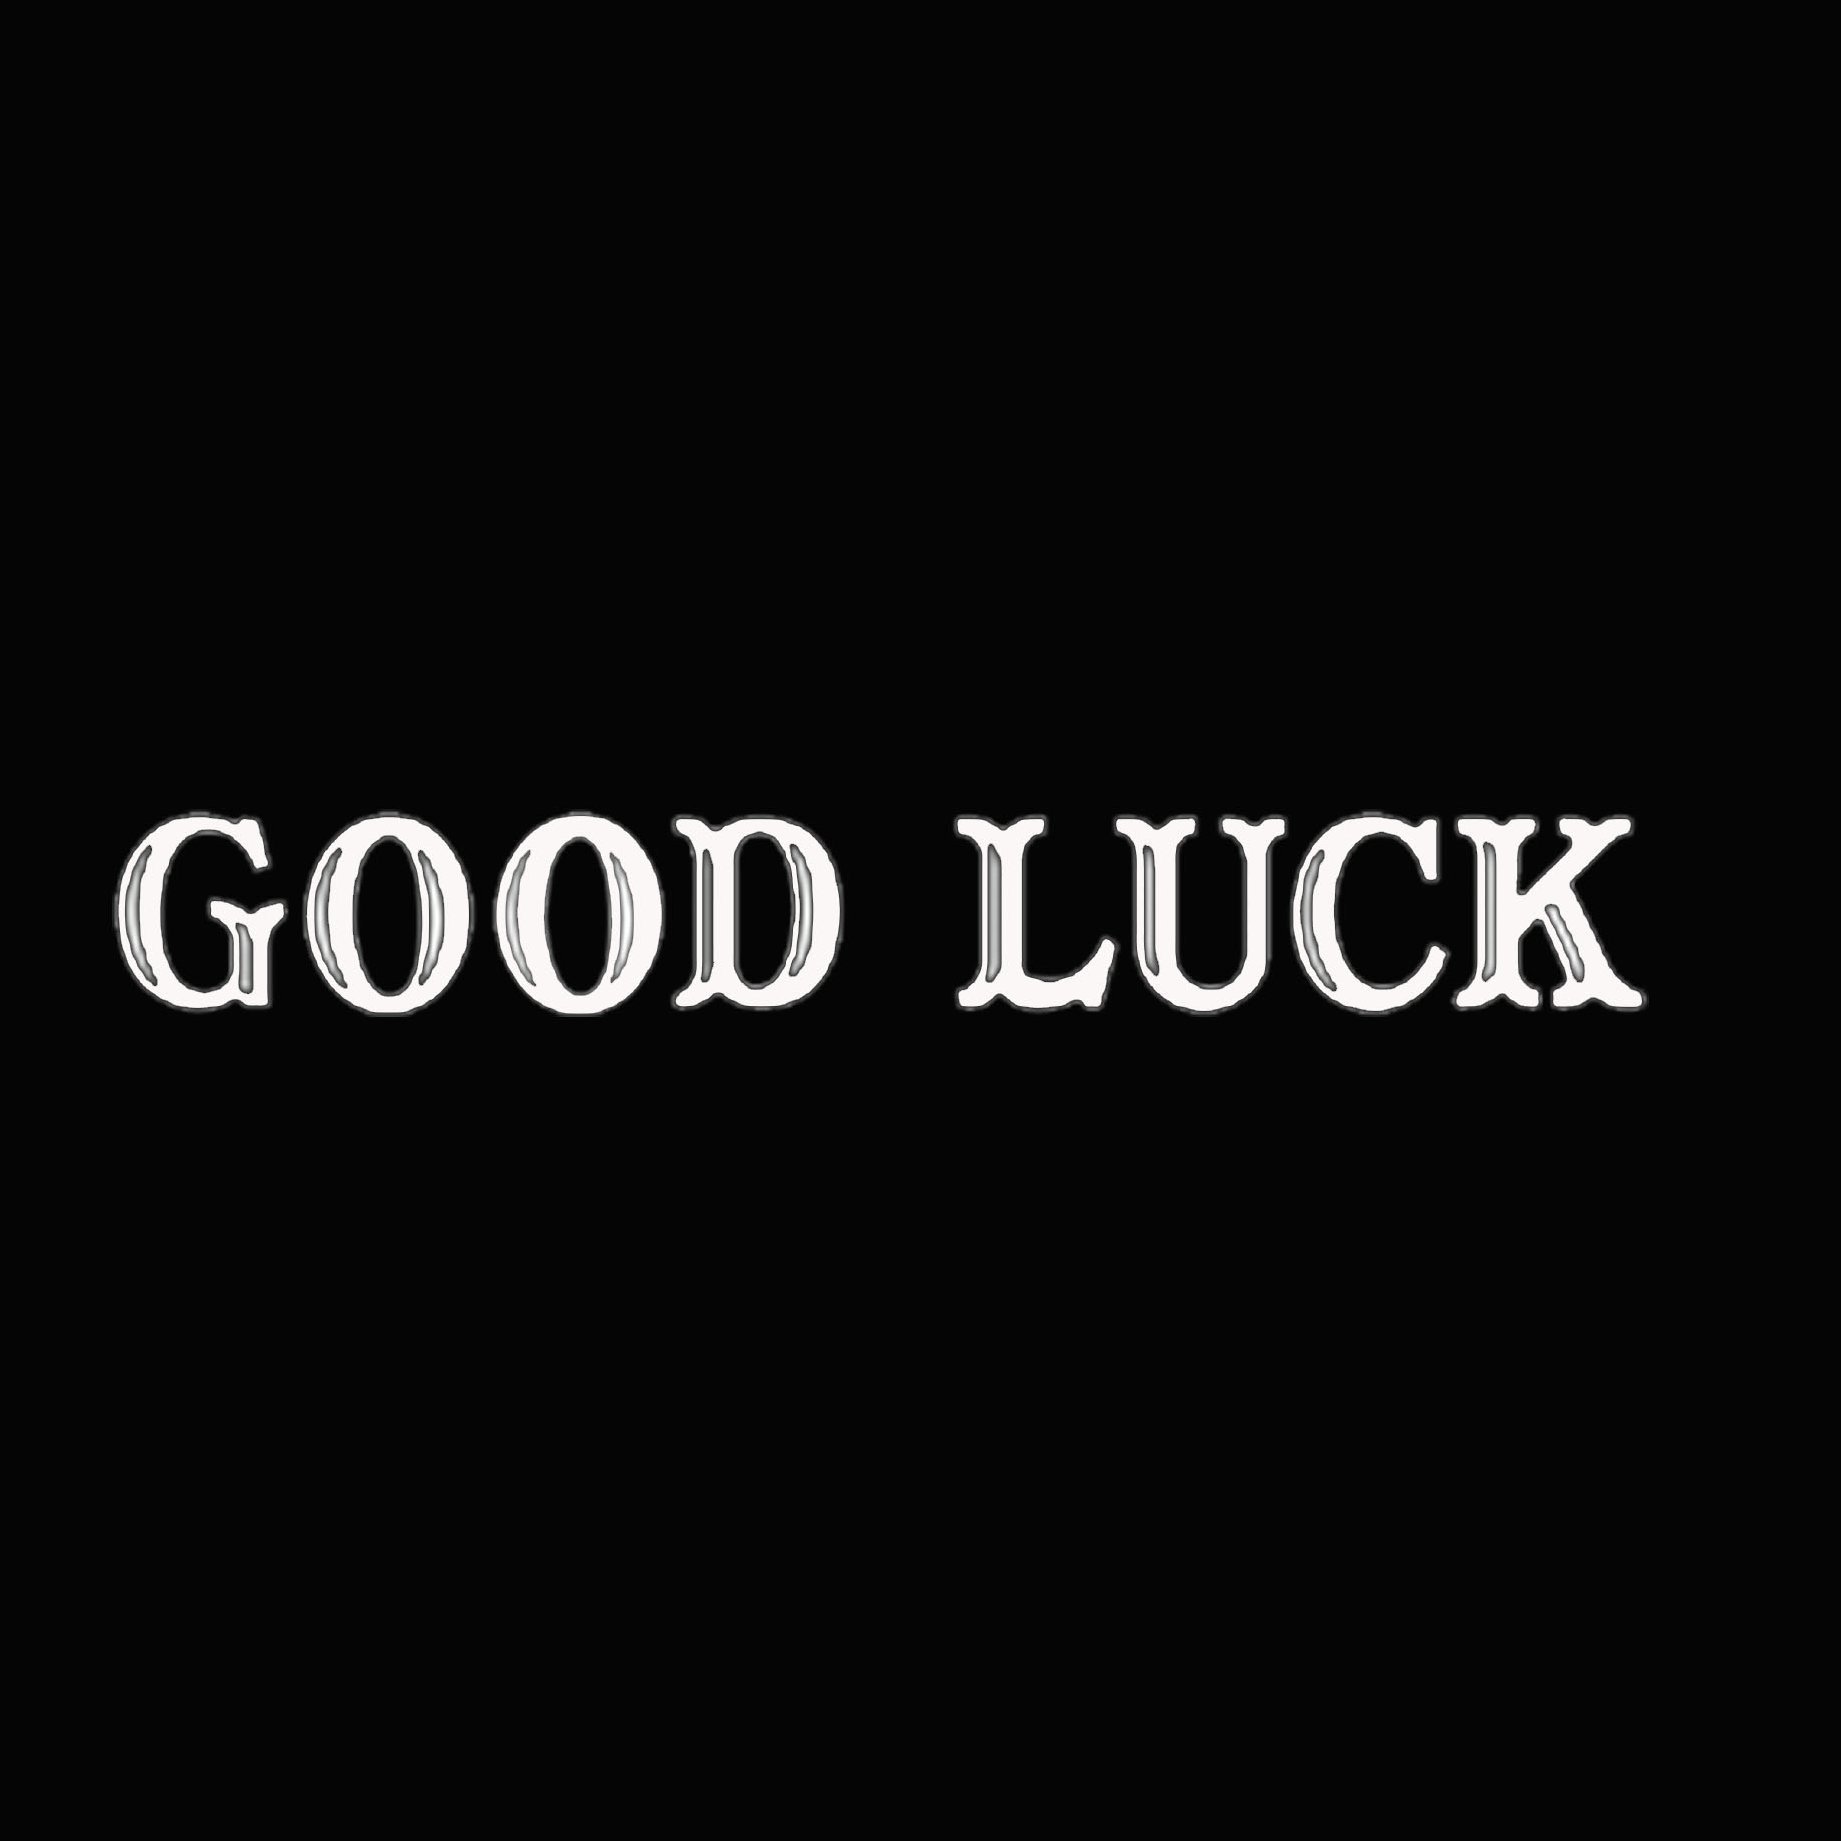 Official Twitter page for upcoming horror movie Good Luck.